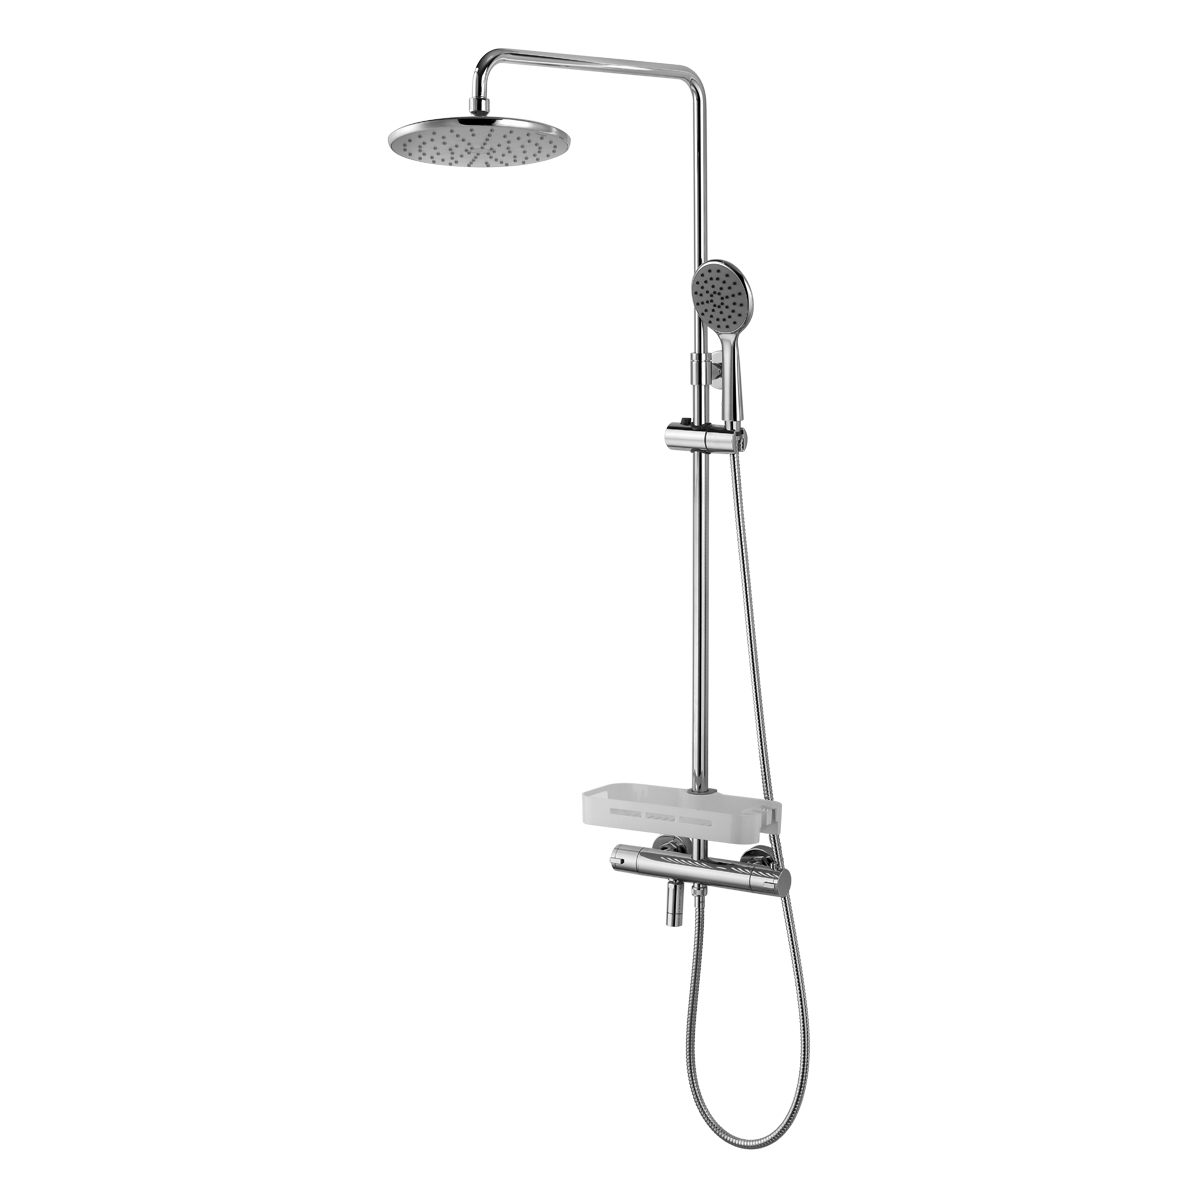 LM7010C Thermostatic bath and shower faucet with adjustable rod height, swivel spout and «Tropical rain» shower head